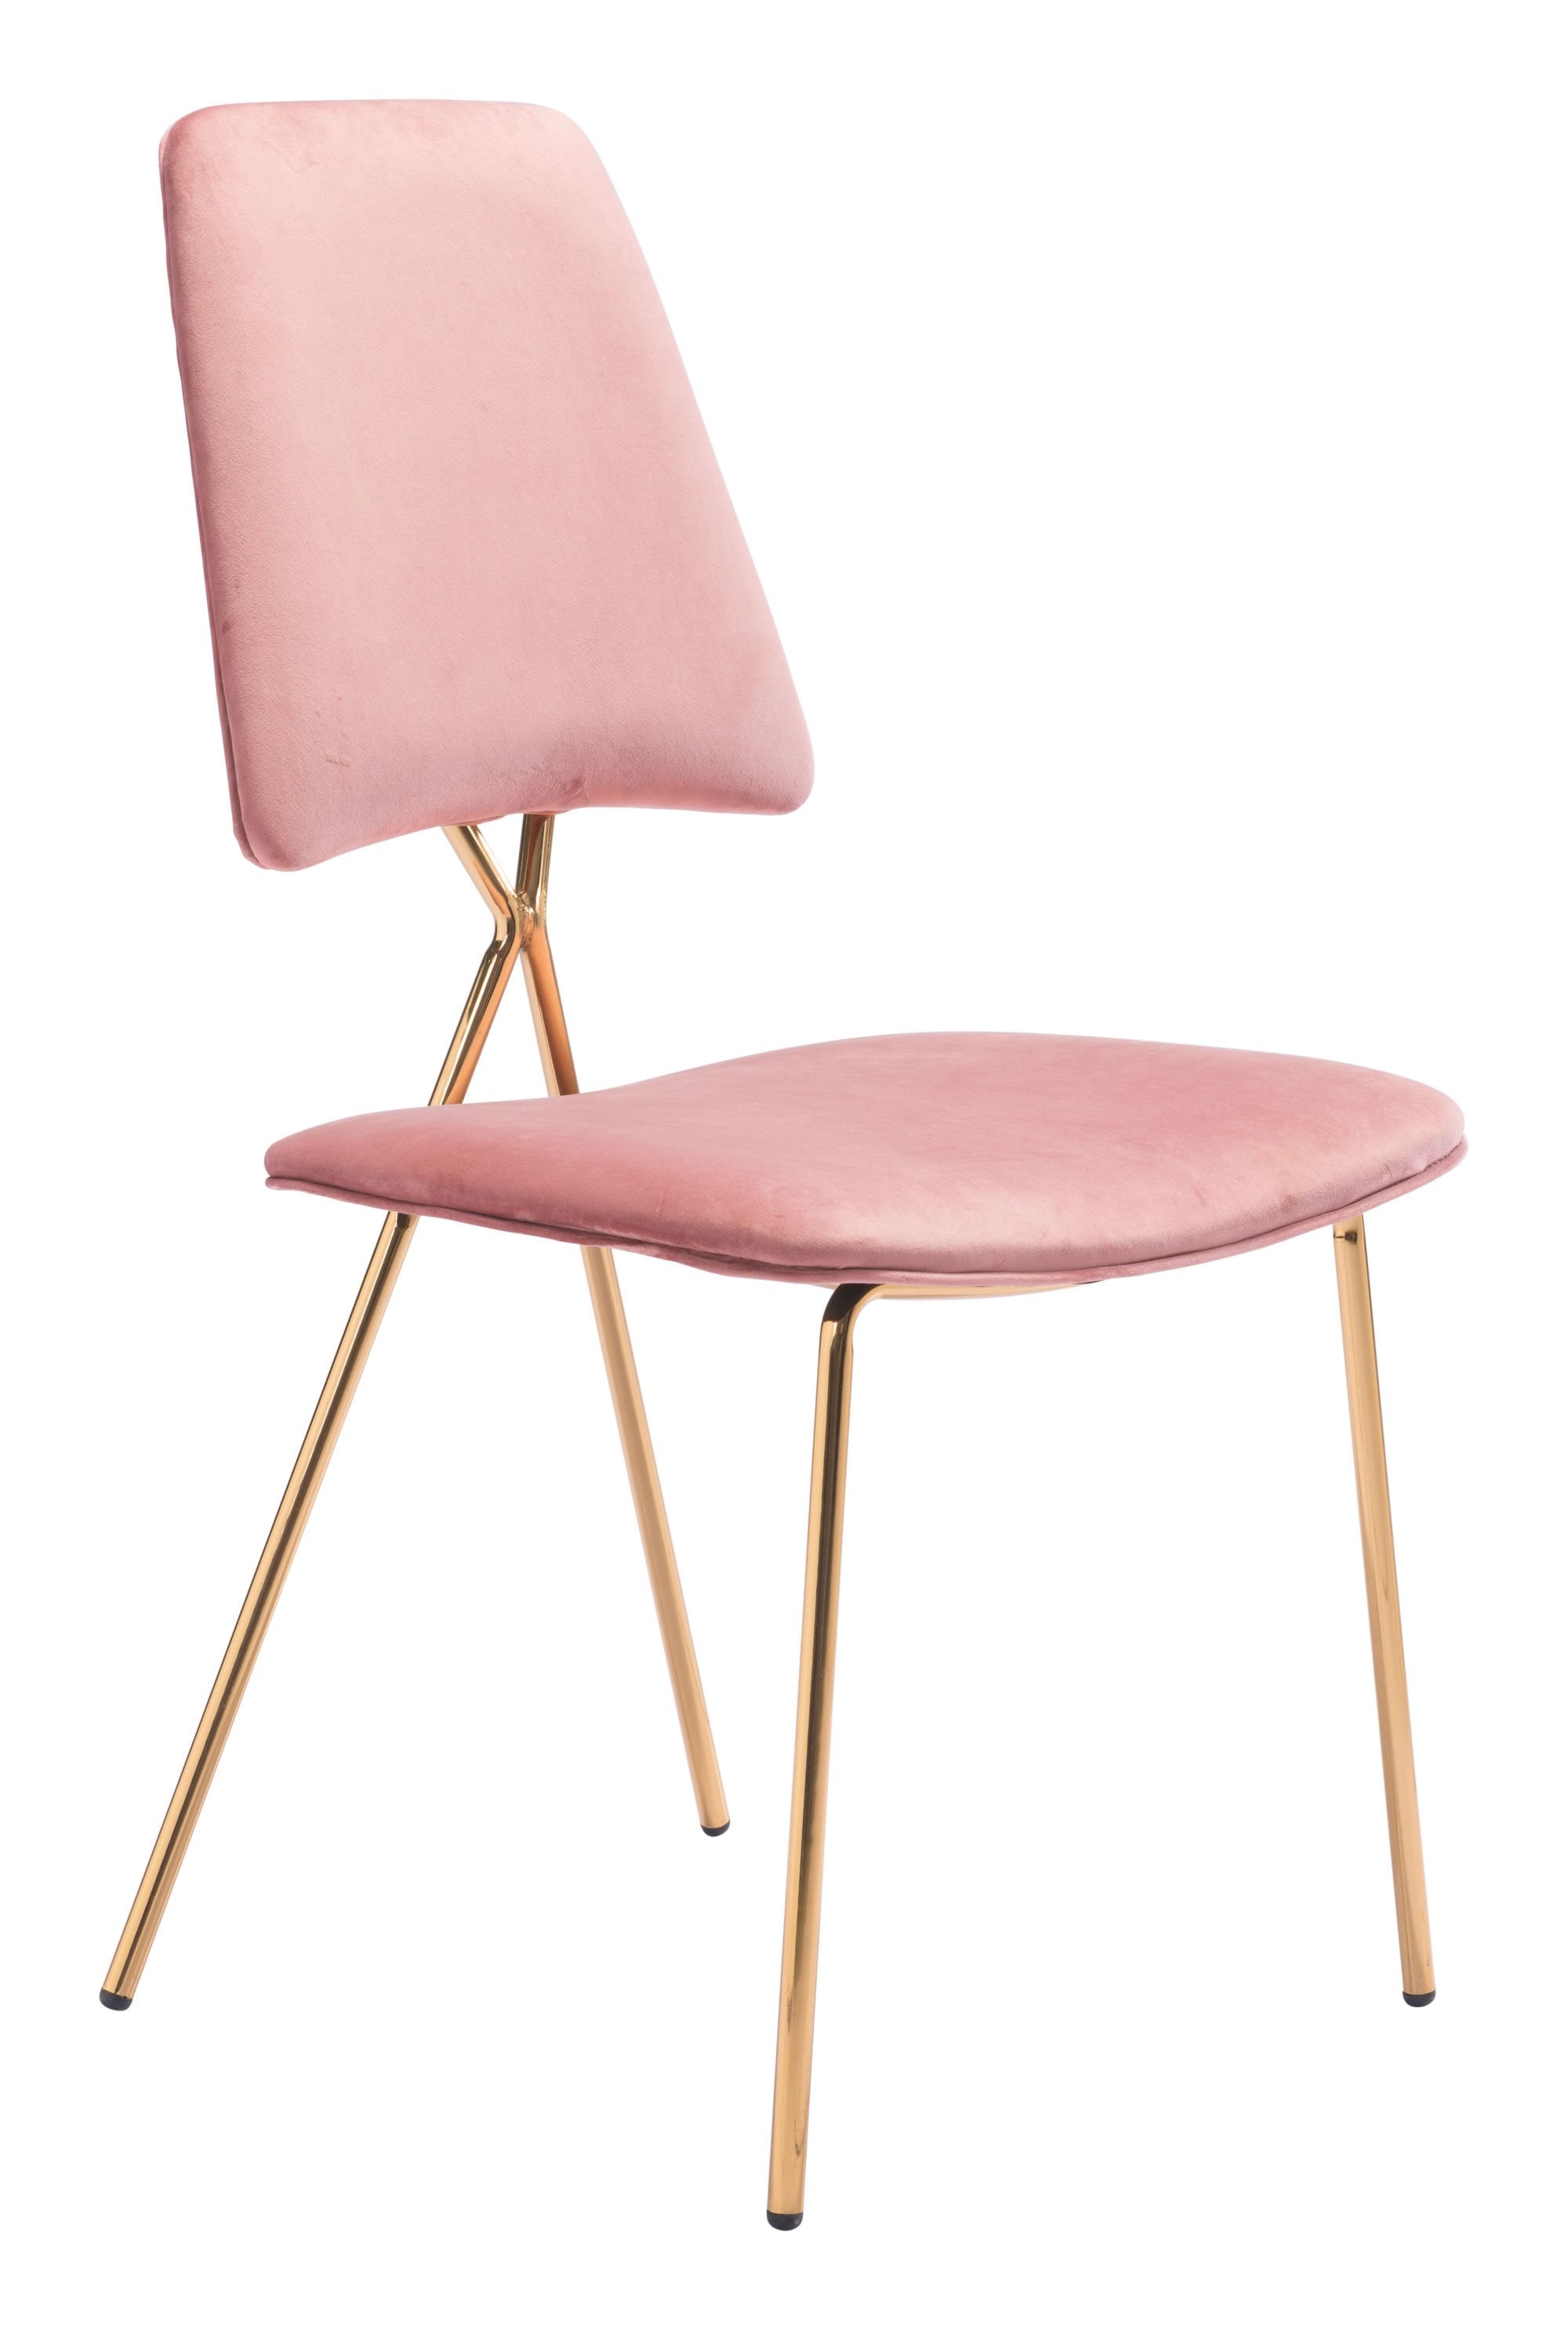 19.7" x 21.9" x 35.8" Pink & Gold, Velvet, Steel & Plywood, Chair Chair